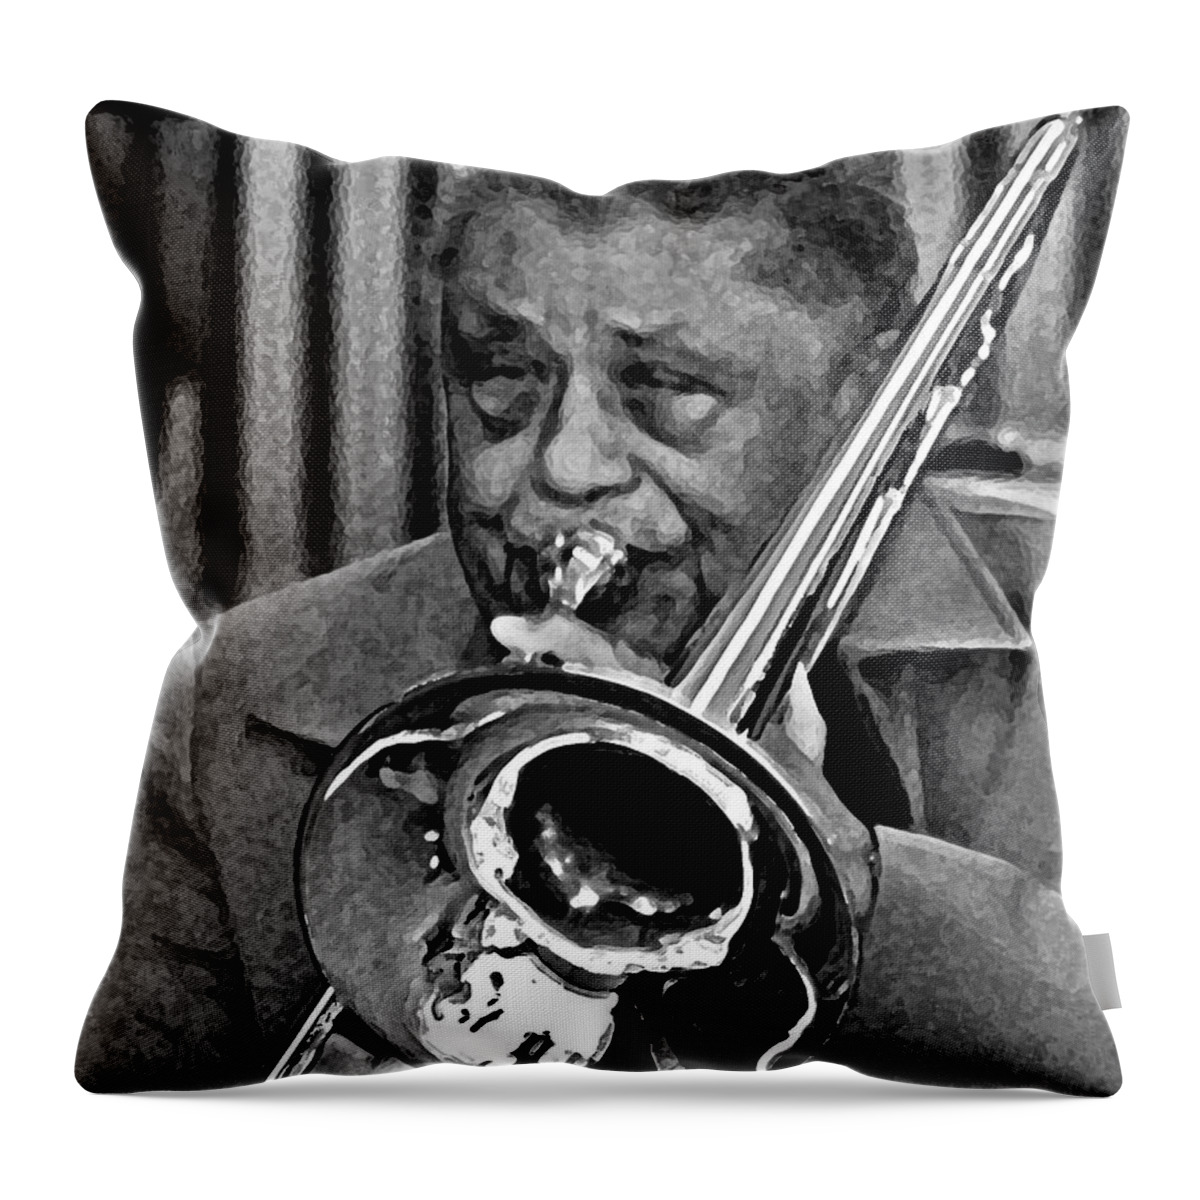 Excelsior Band Throw Pillow featuring the digital art Excelsior Band Horn man by Michael Thomas